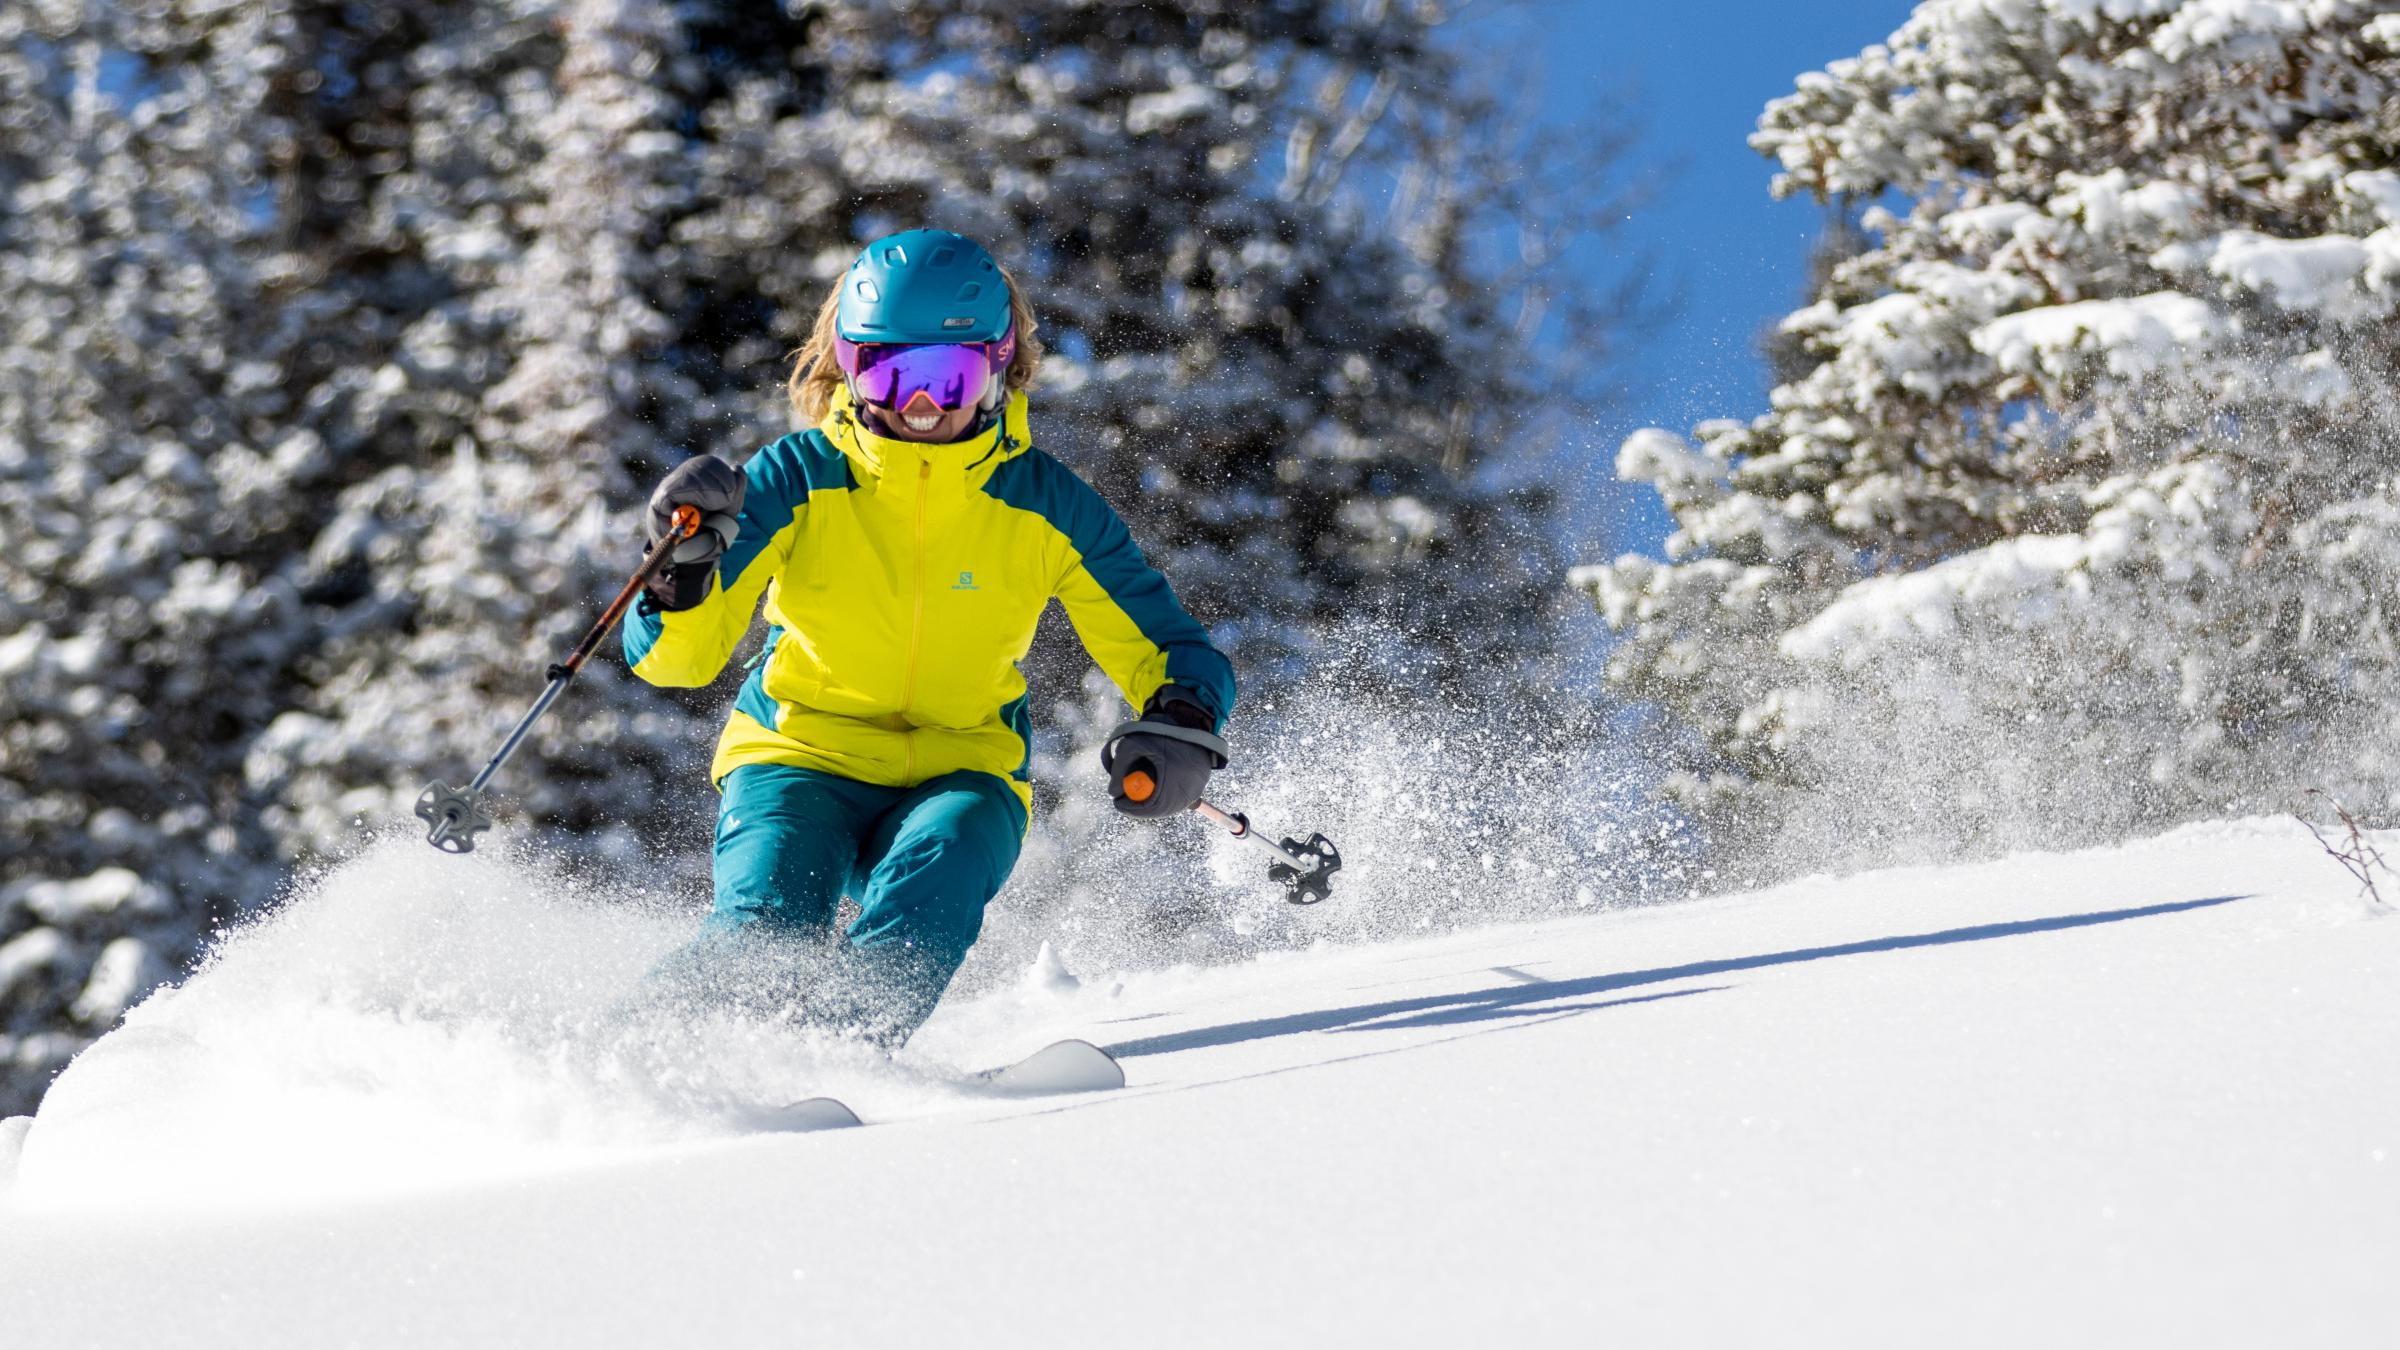 A guest in a bright jacket skiing through powder smiling